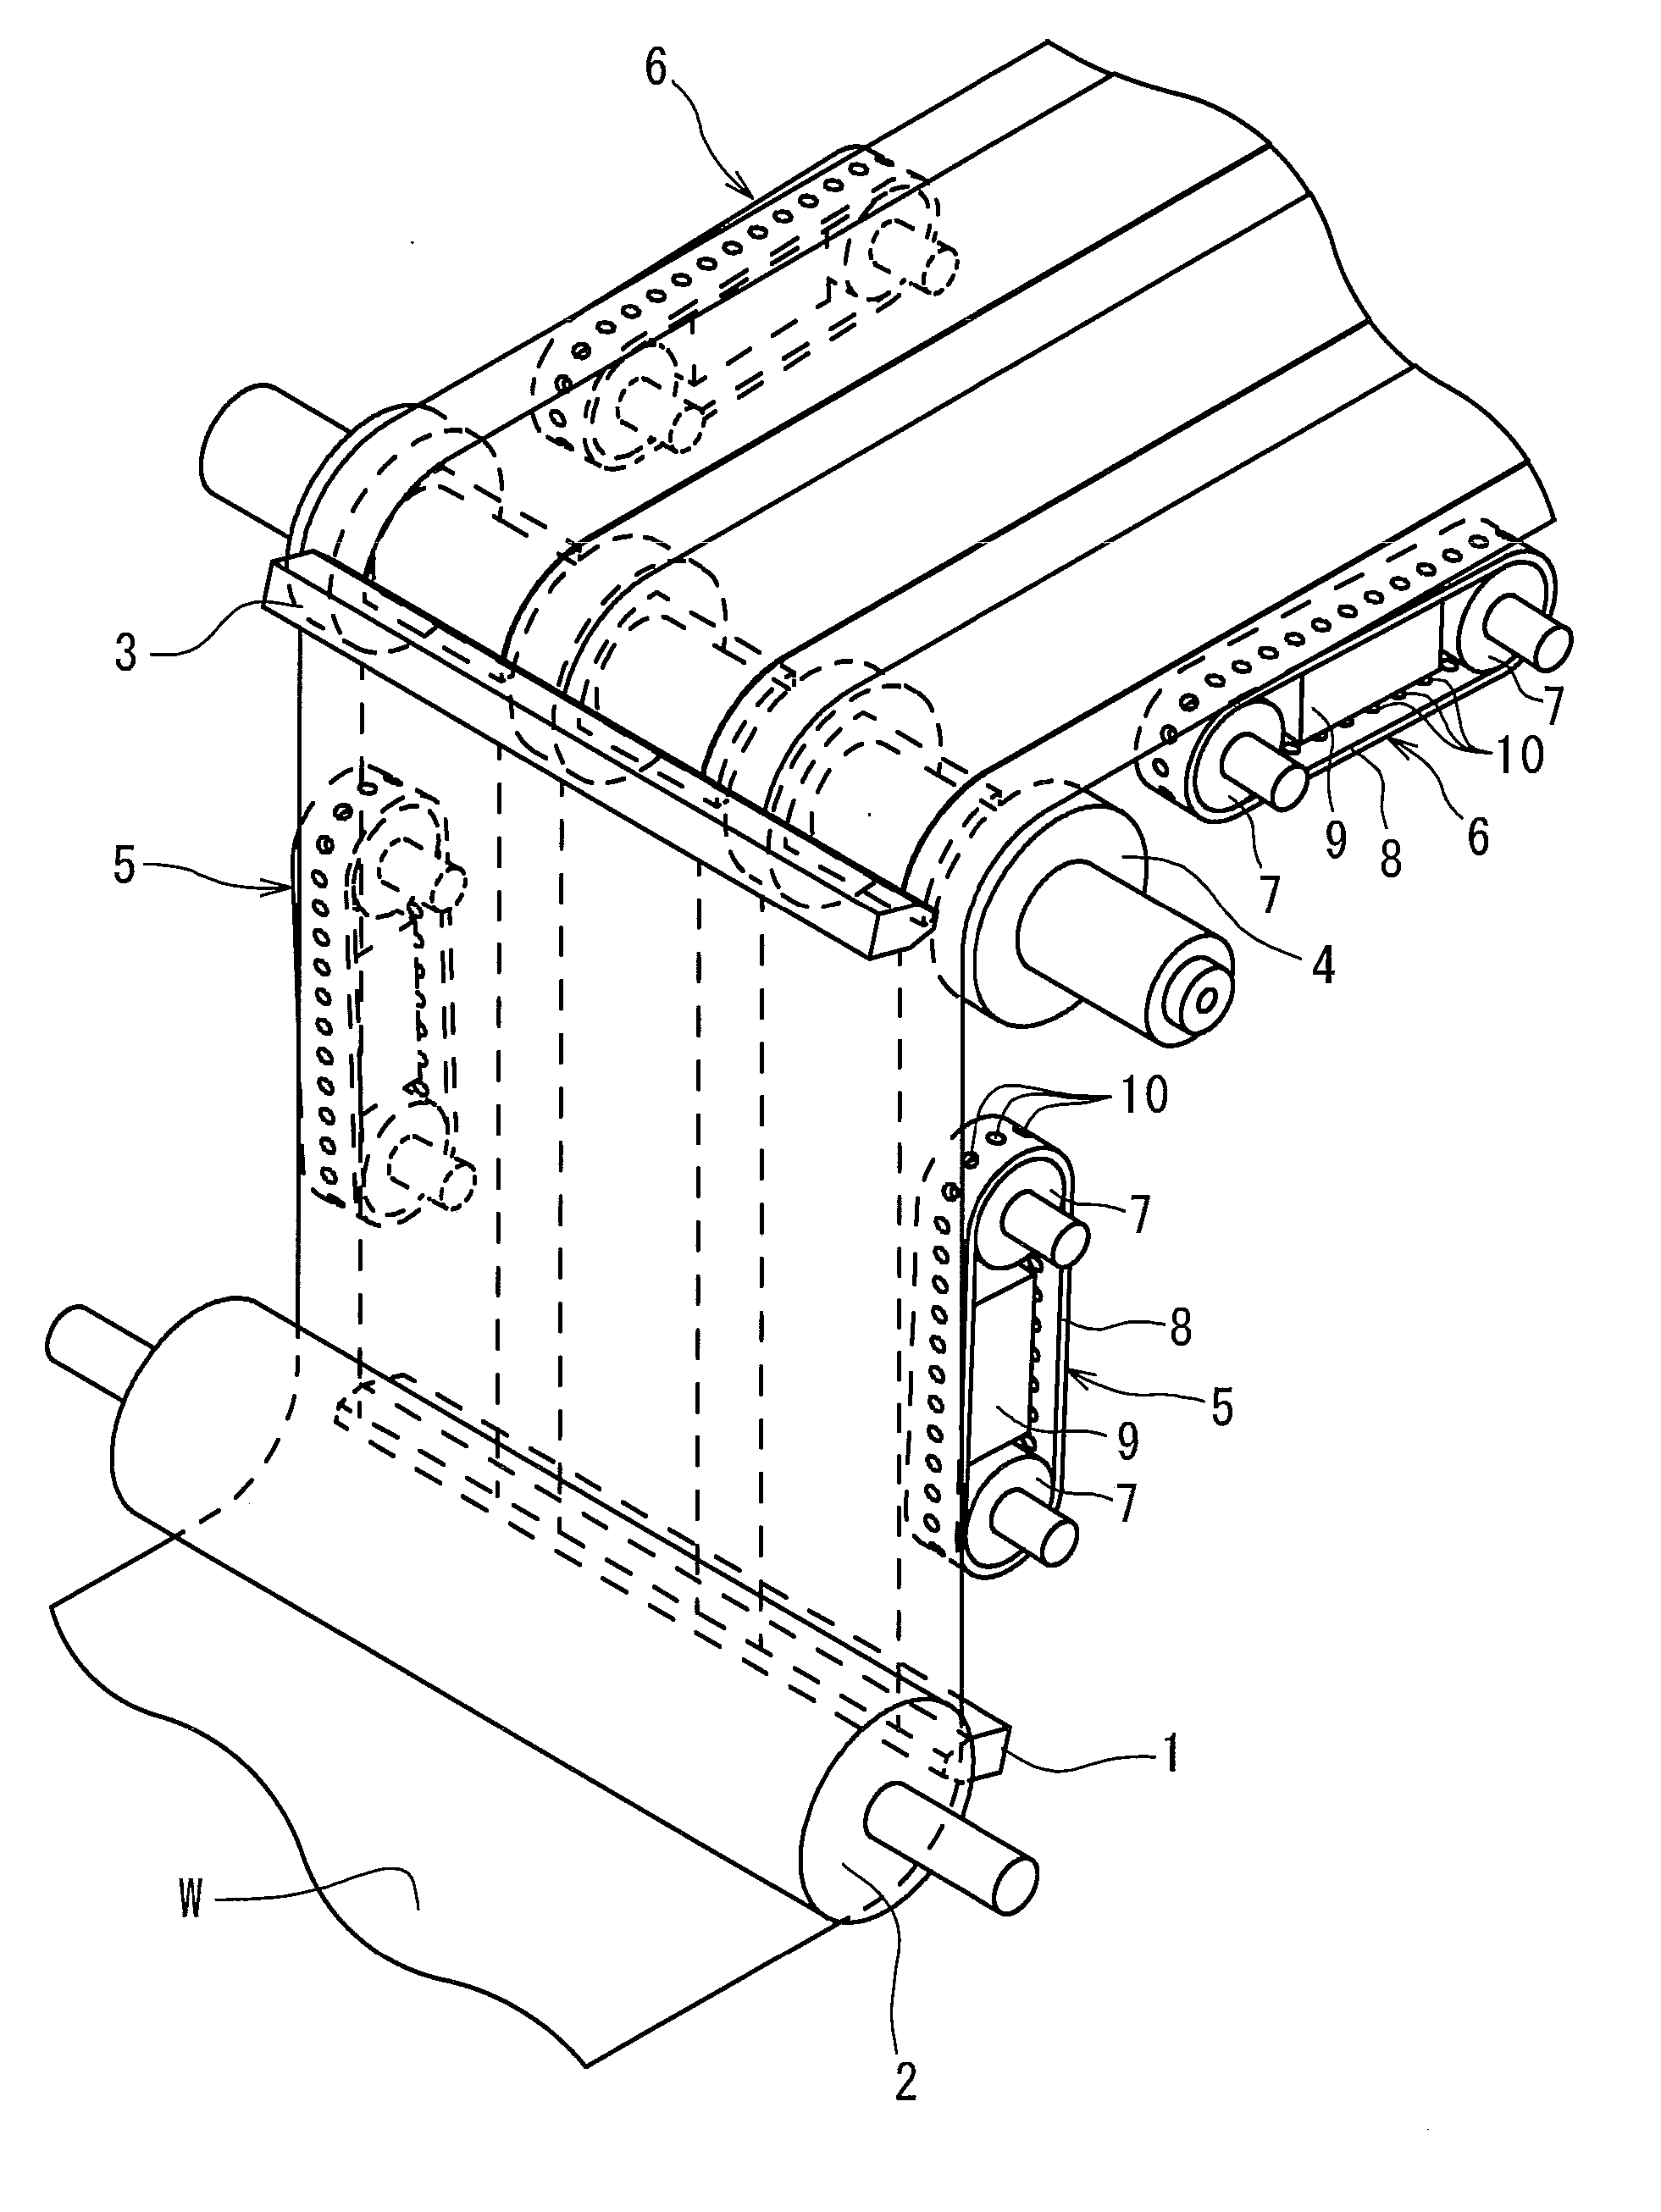 Double side coating device